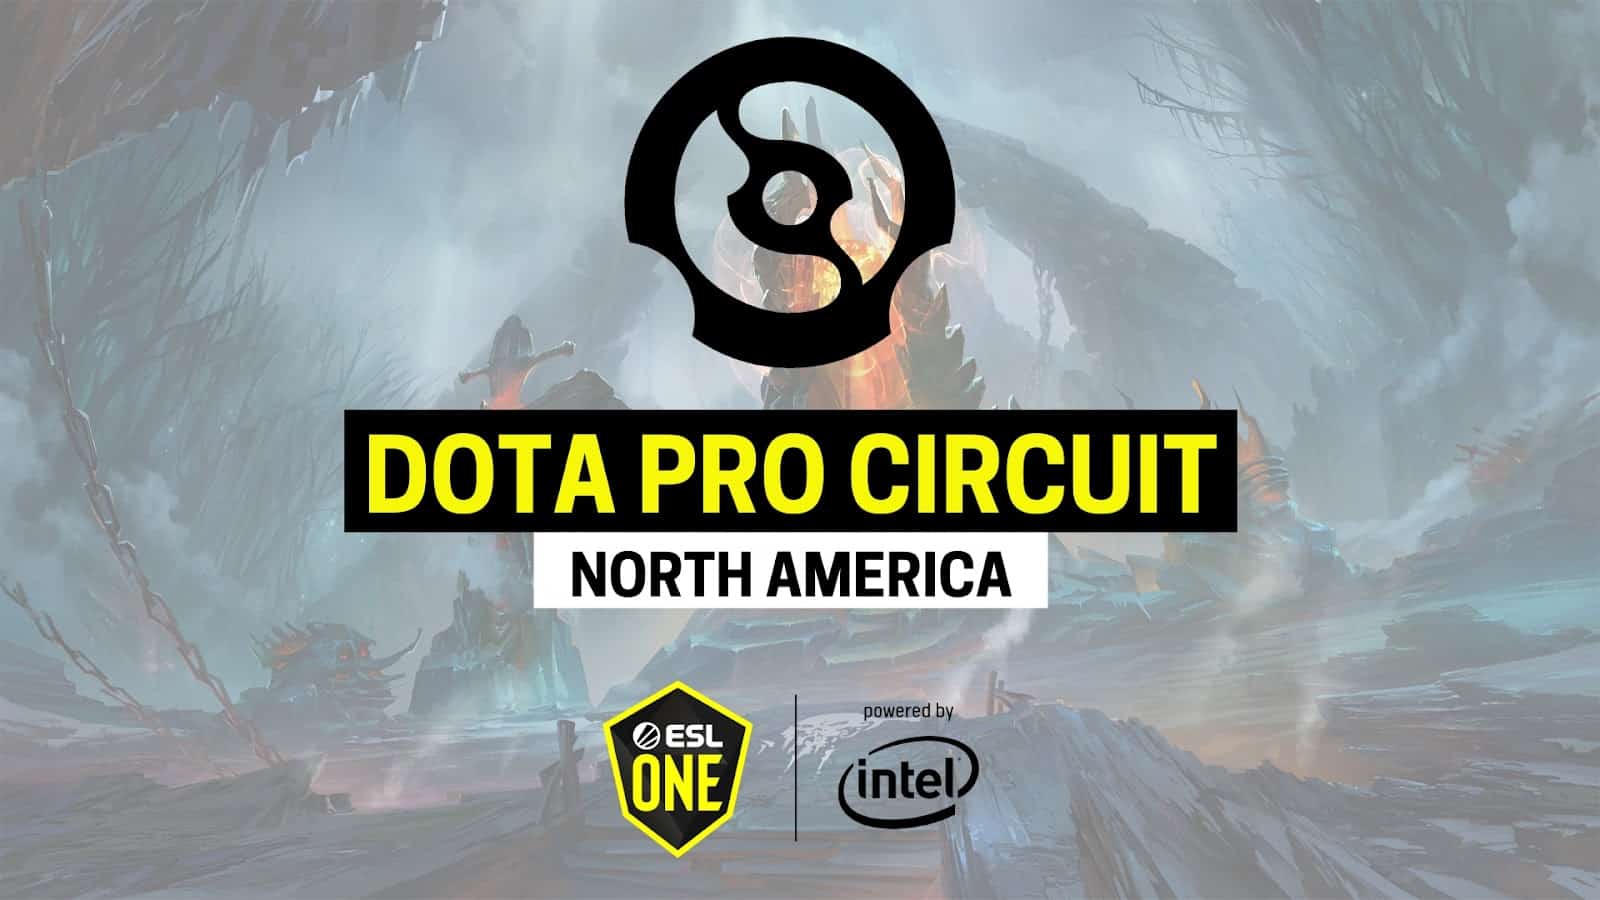 The symbol for the Dota Pro Circuit, a stylized aegis of the immortals, appears in black above the words "Dota Pro Circuit North America" in Yellow an White. The ESL One and Intel logos appear beneath